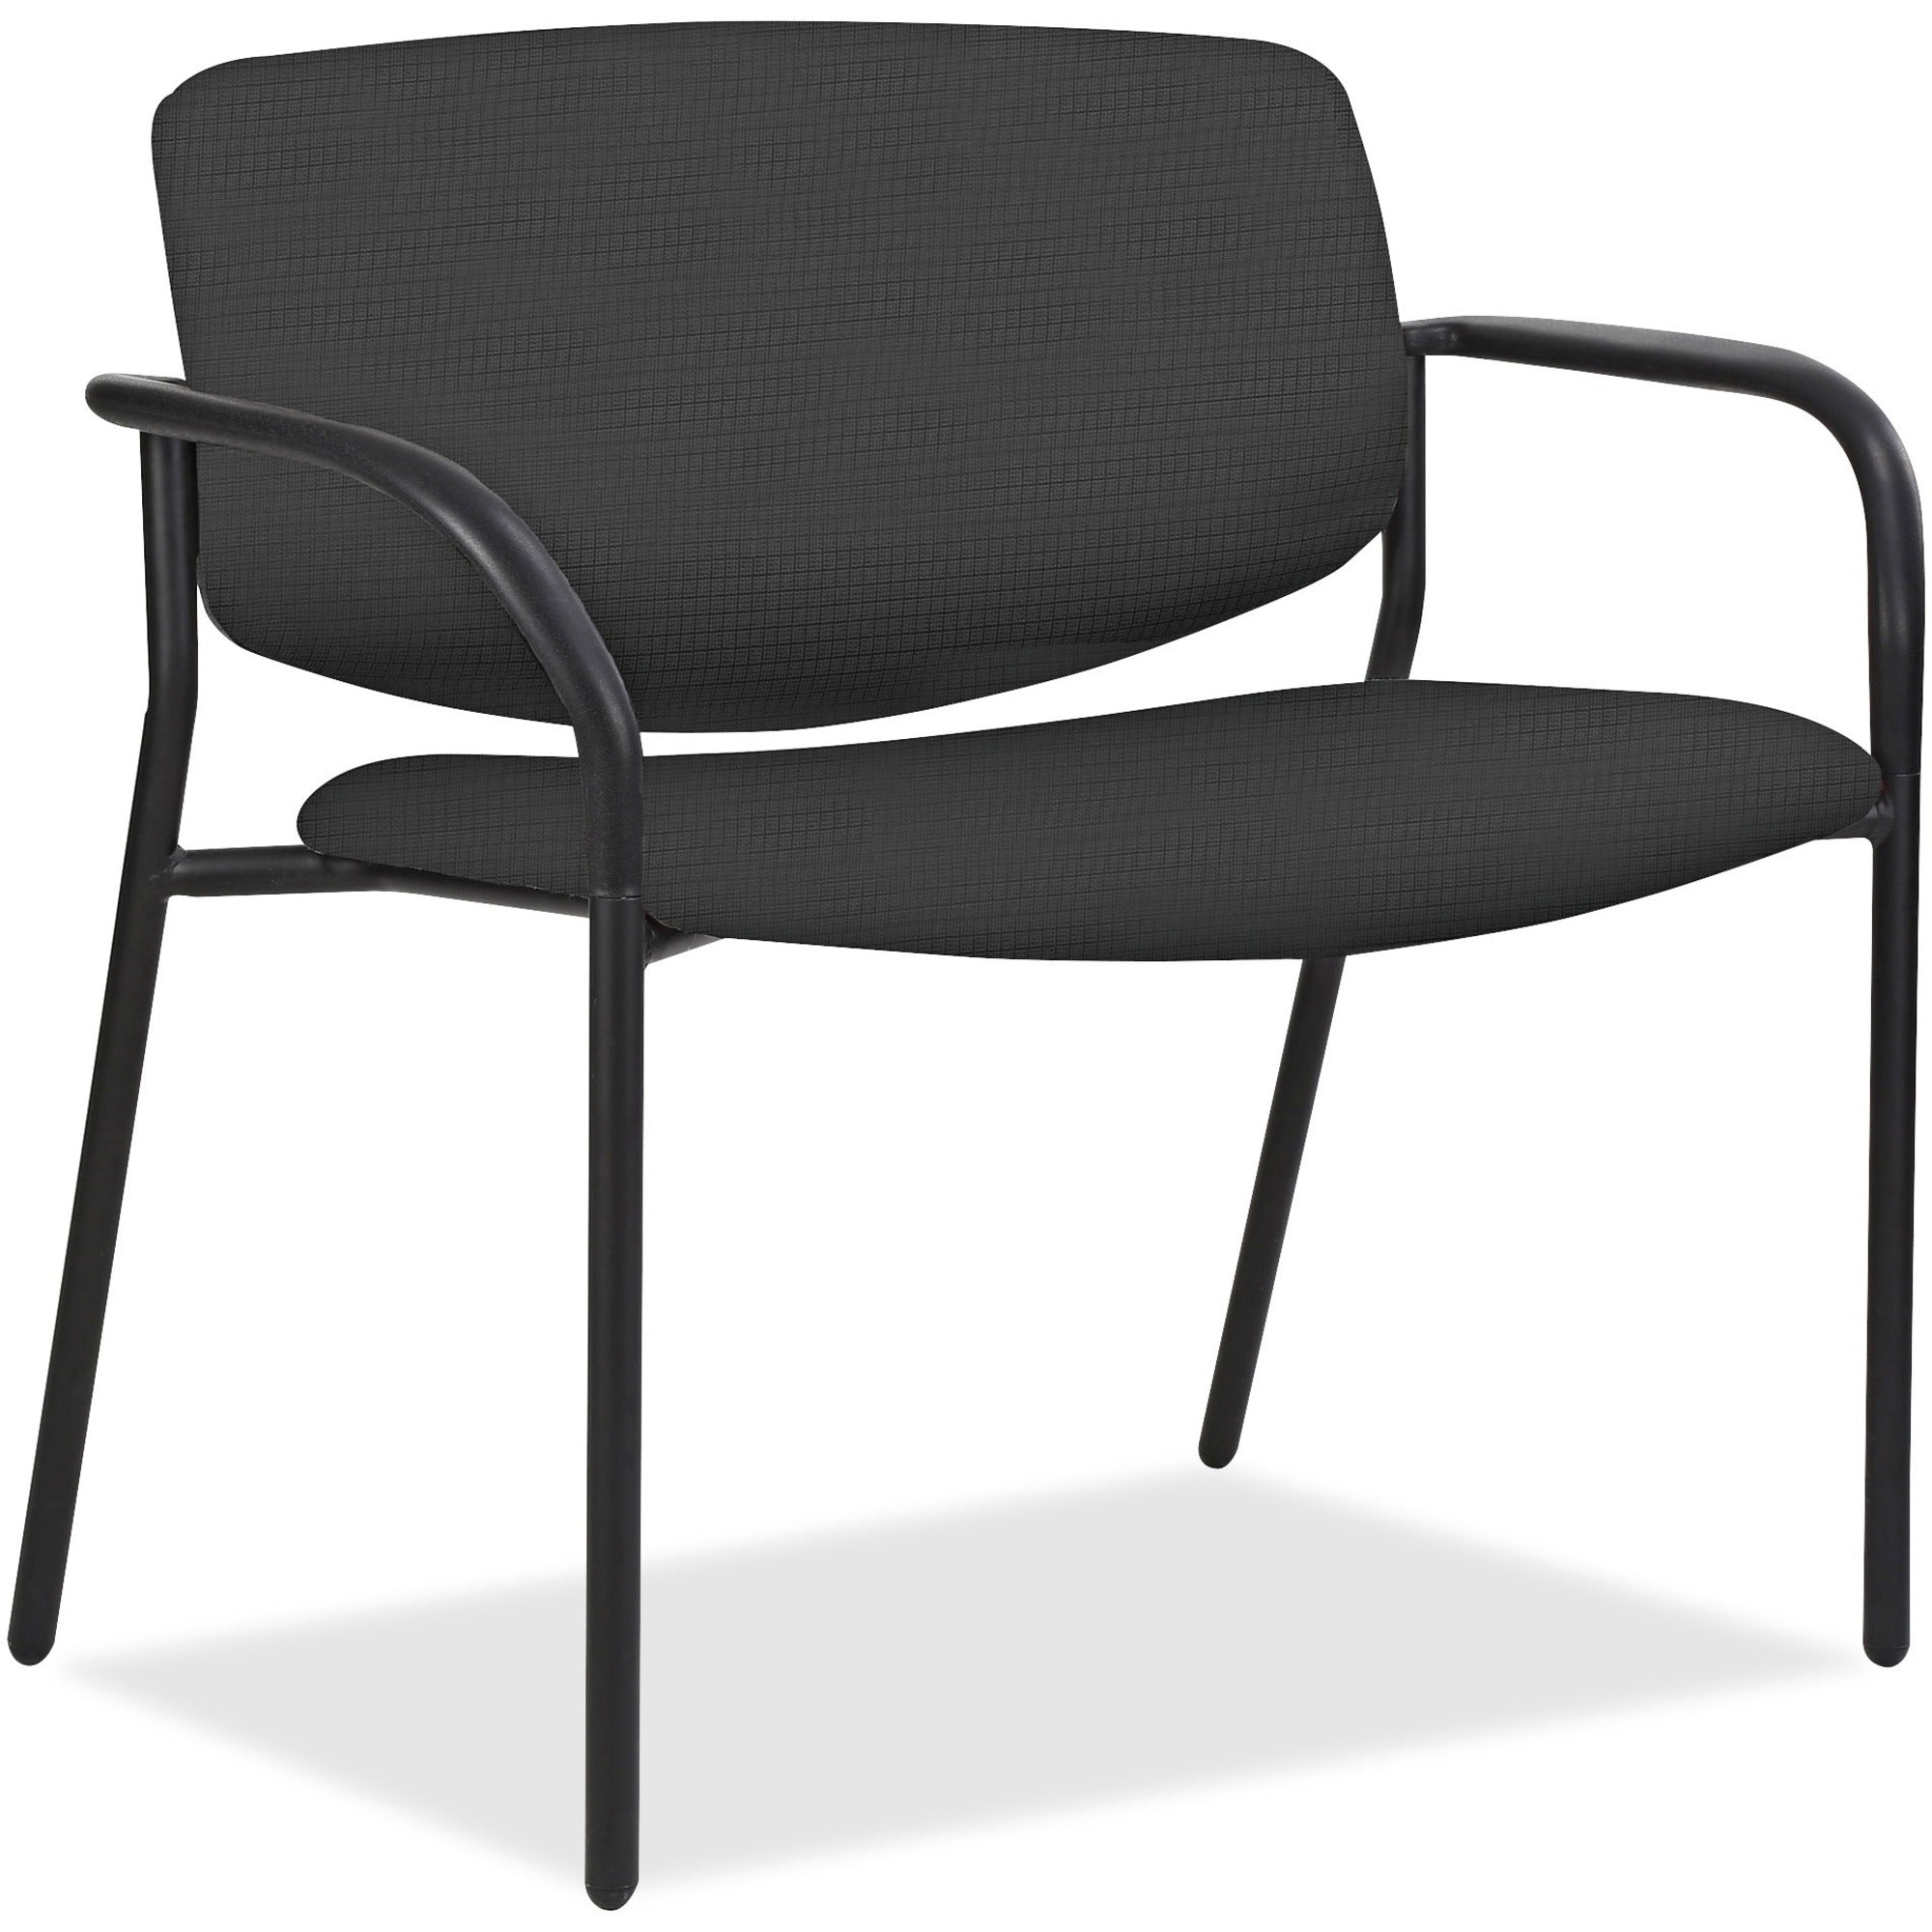 lorell-avent-big-&-tall-upholstered-guest-chair-with-arms-ash-steel-crepe-fabric-seat-ash-steel-back-powder-coated-black-tubular-steel-frame-four-legged-base-armrest-1-each_llr83120a202 - 1